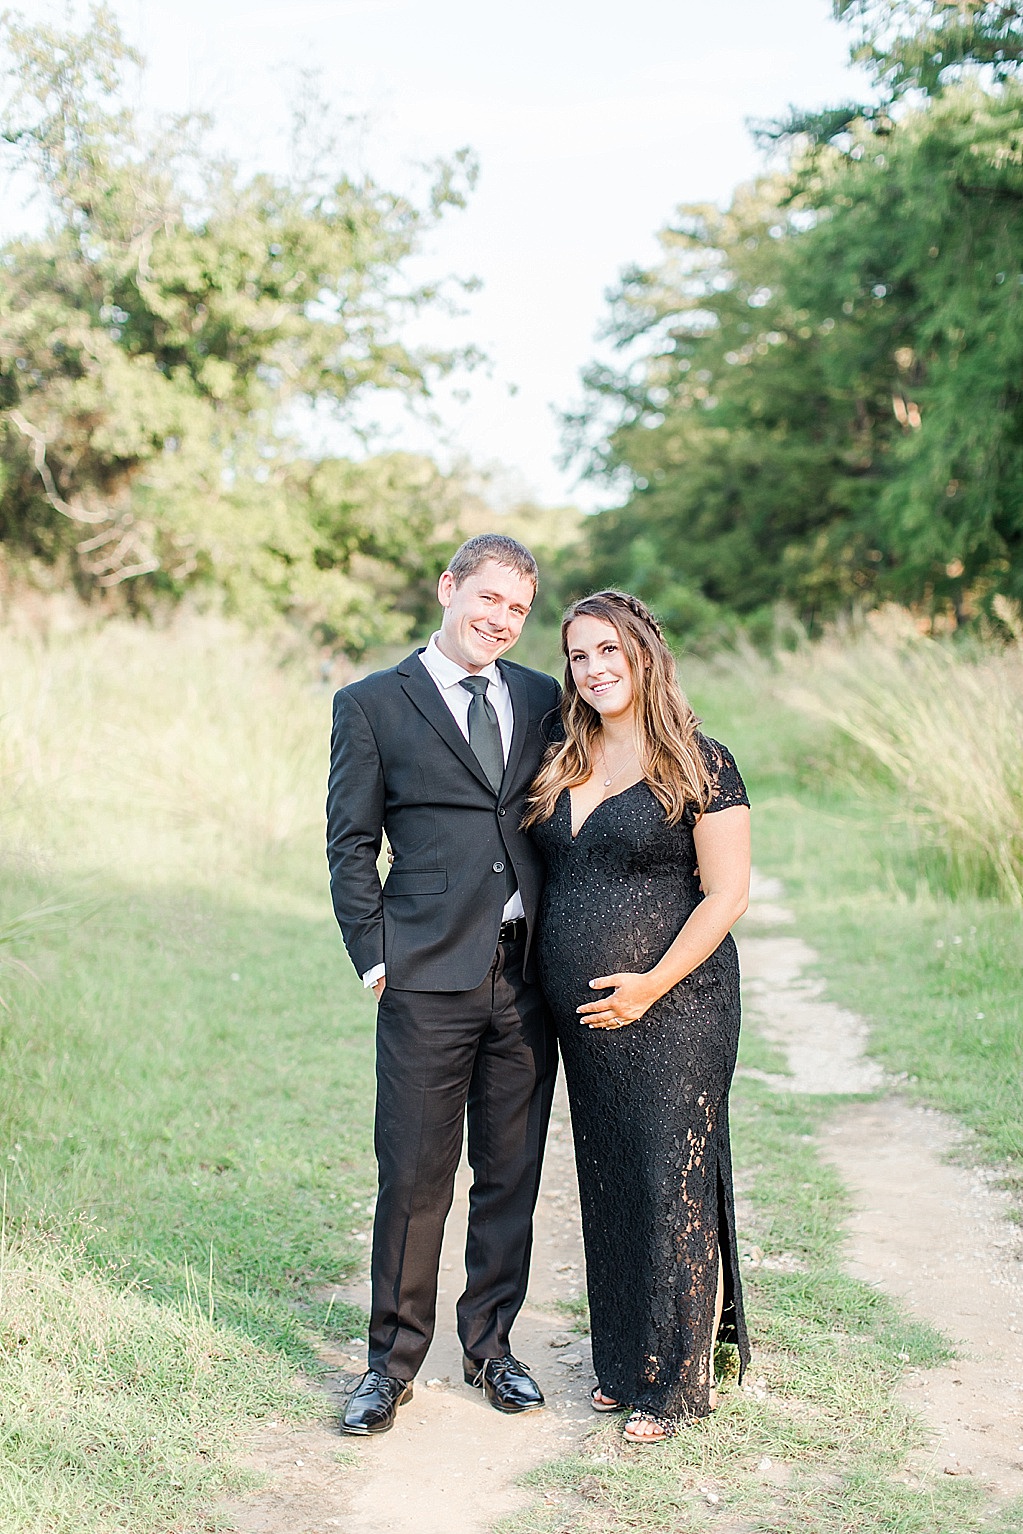 Family photo session at Cibolo Nature Center in Boerne Texas by Allison Jeffers Photography 0005